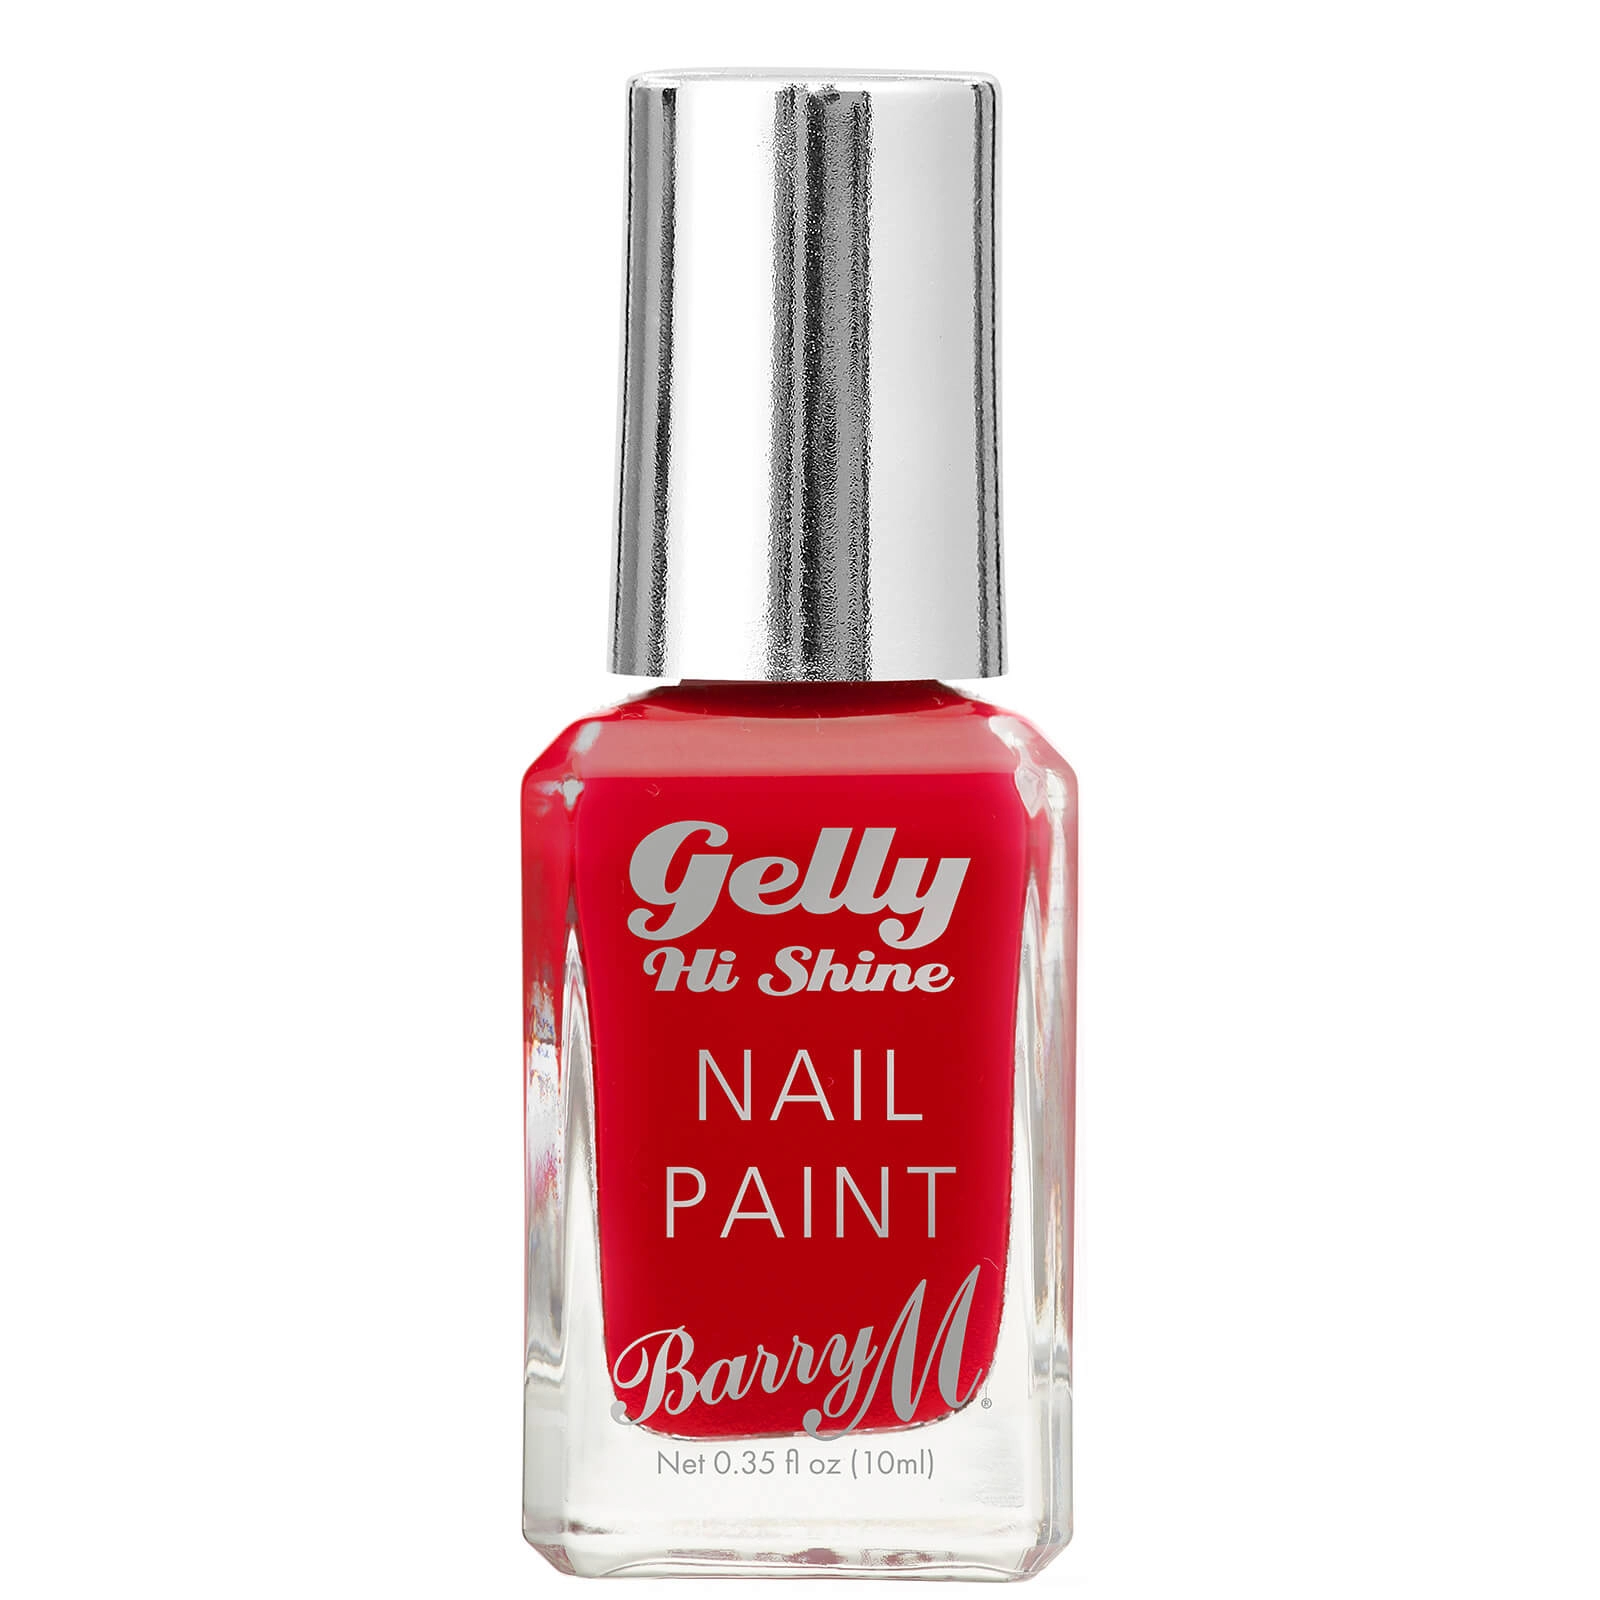 Barry M Gelly Nail Paint - Hot Chilli